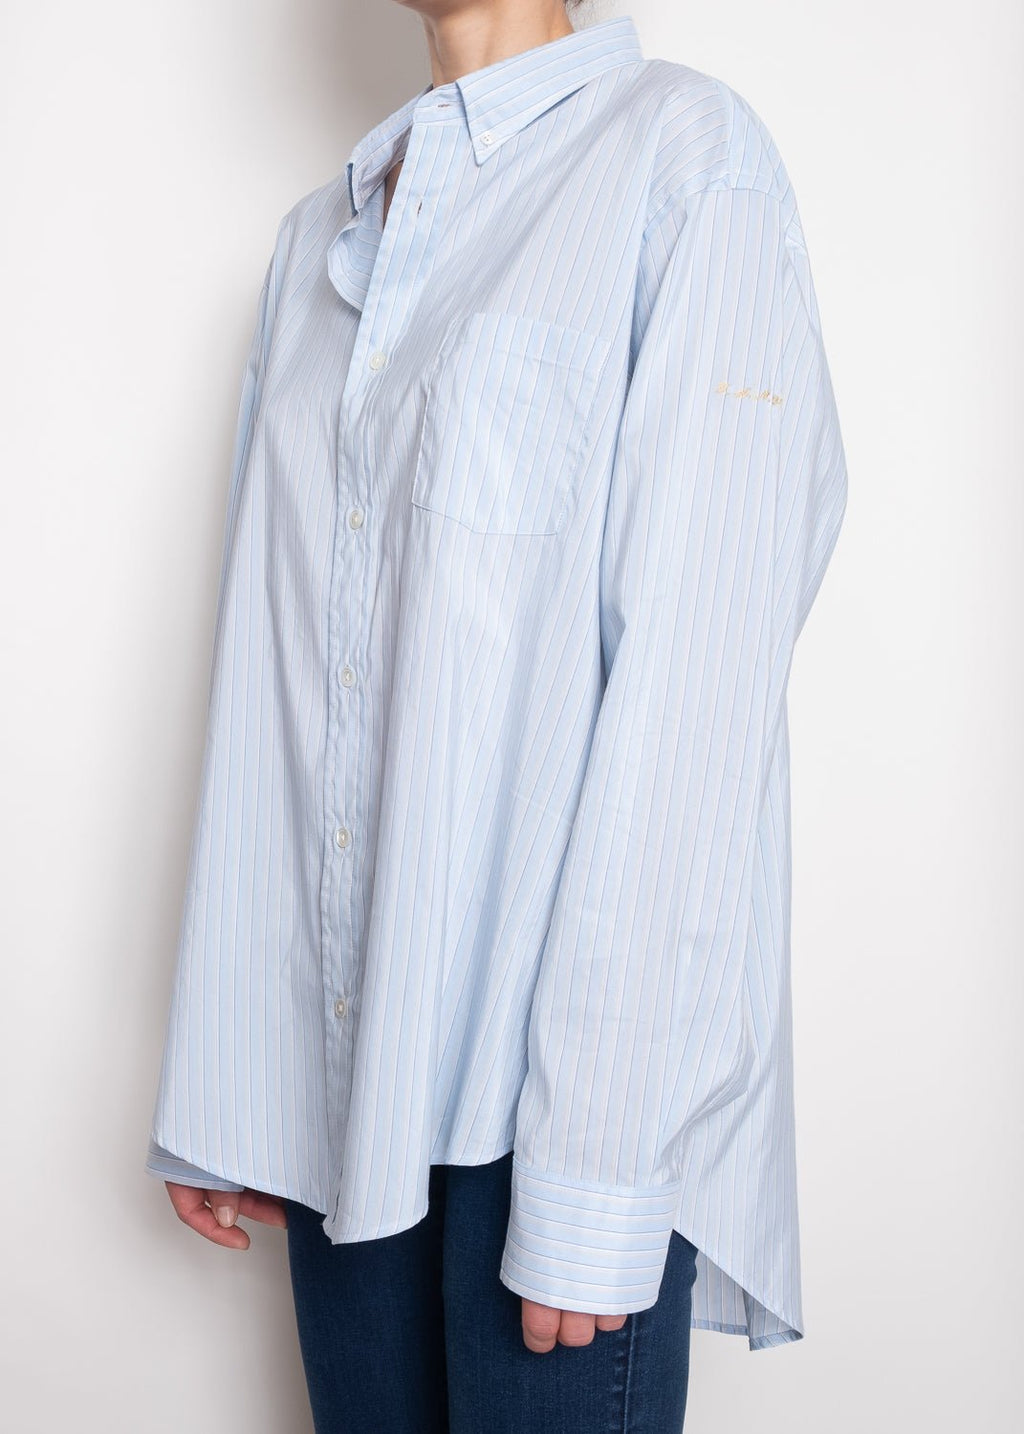 Standard Button Down Shirt / Pacific Blue and Mustard Stripe